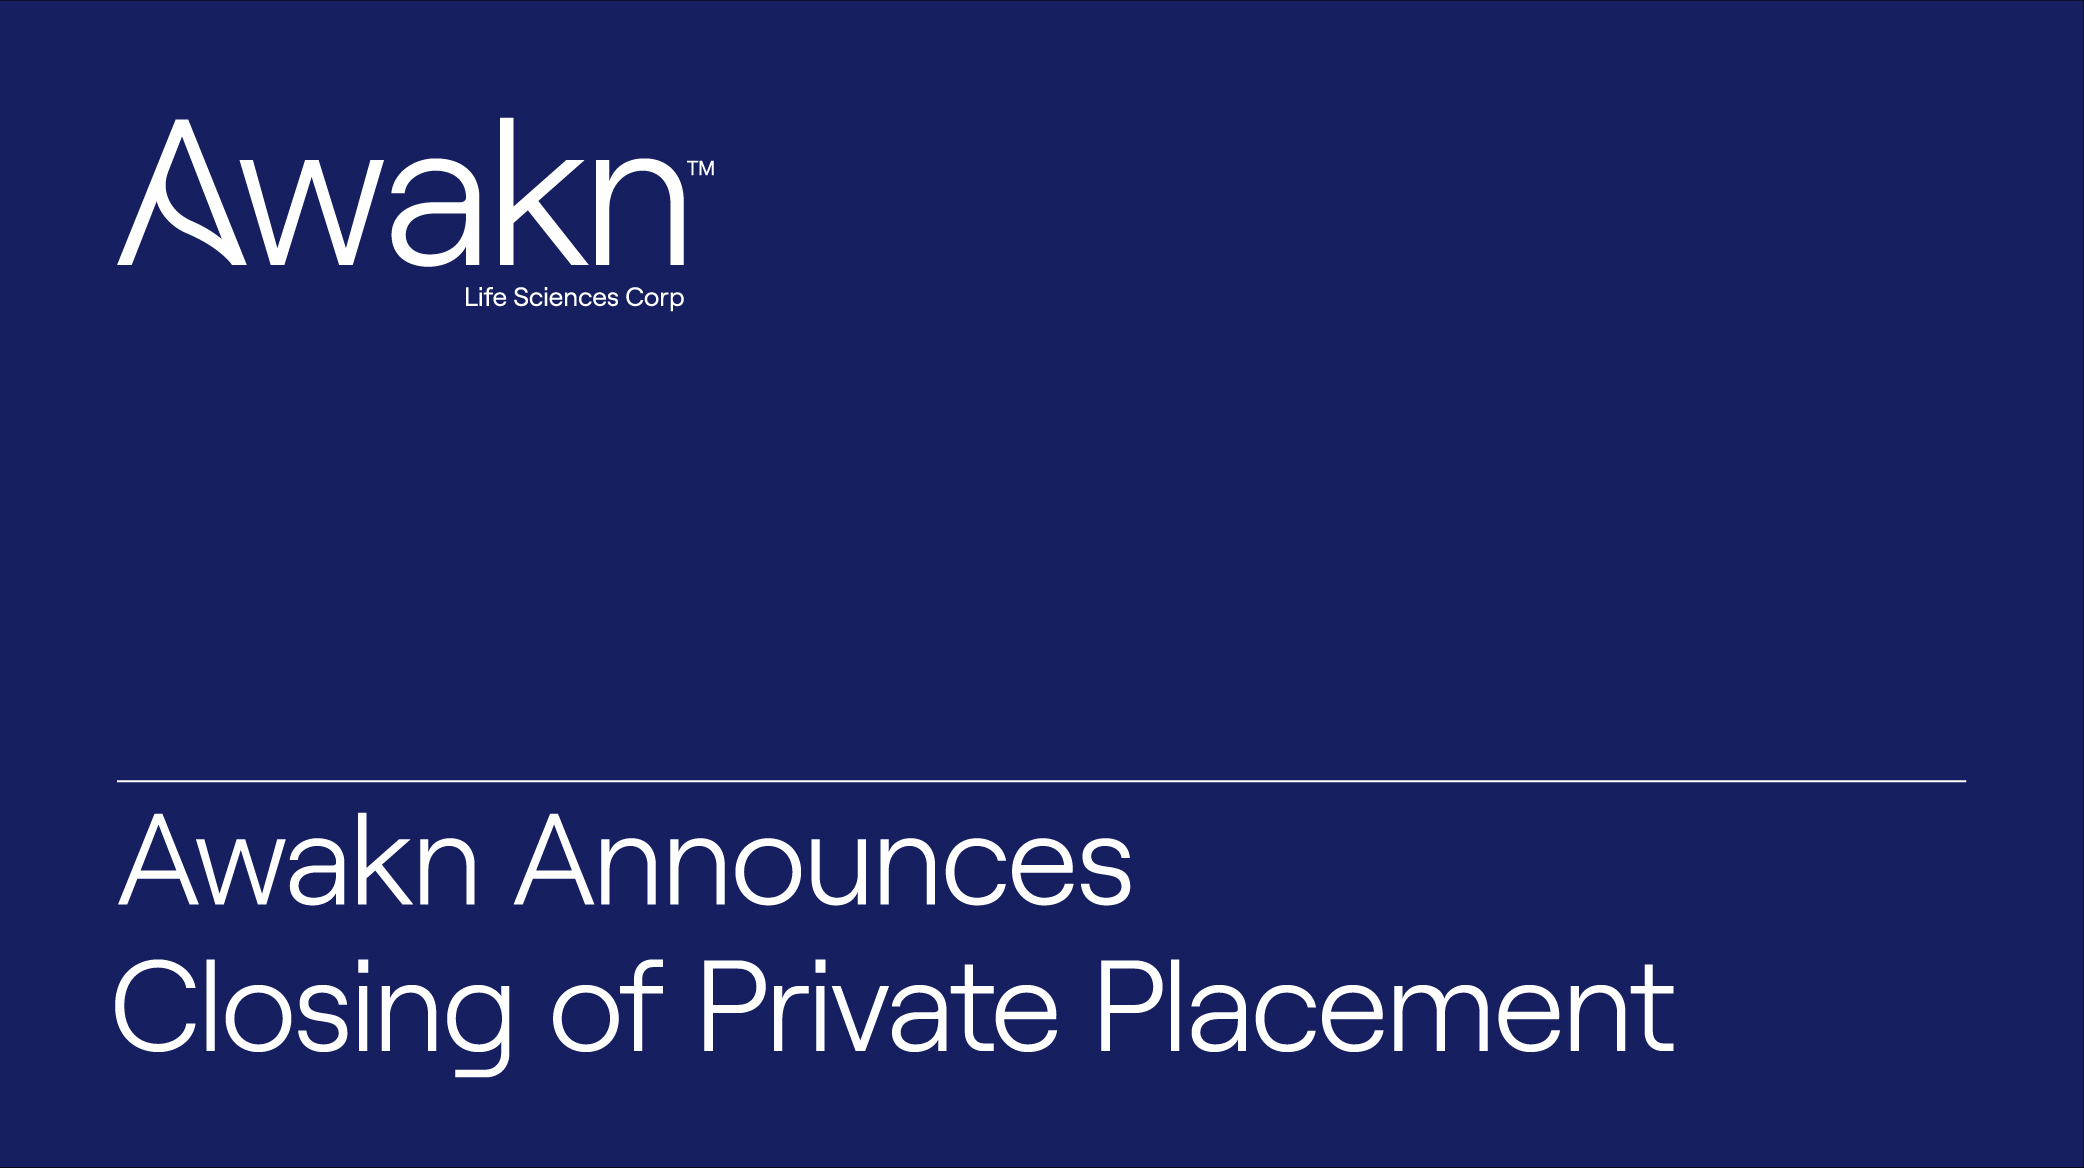 Awakn Life Sciences Announces Closing of Private Placement